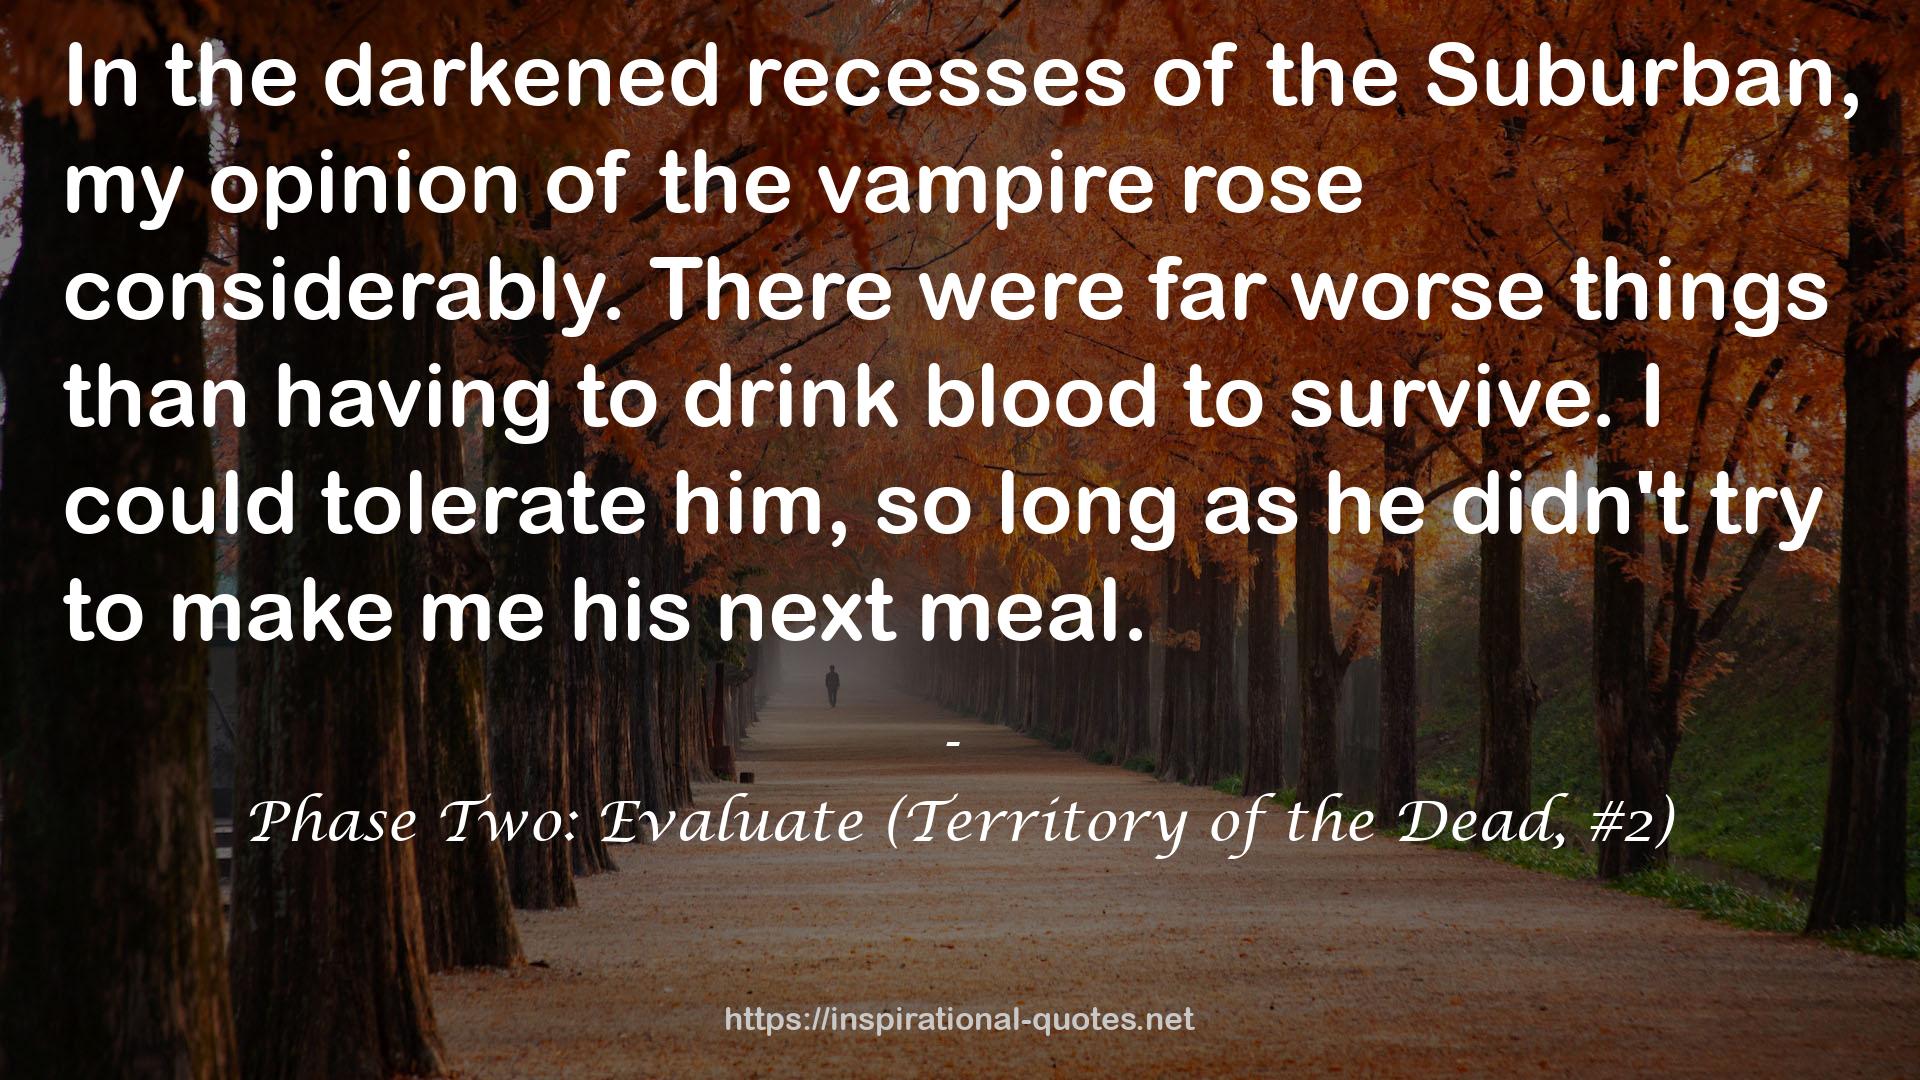 Phase Two: Evaluate (Territory of the Dead, #2) QUOTES